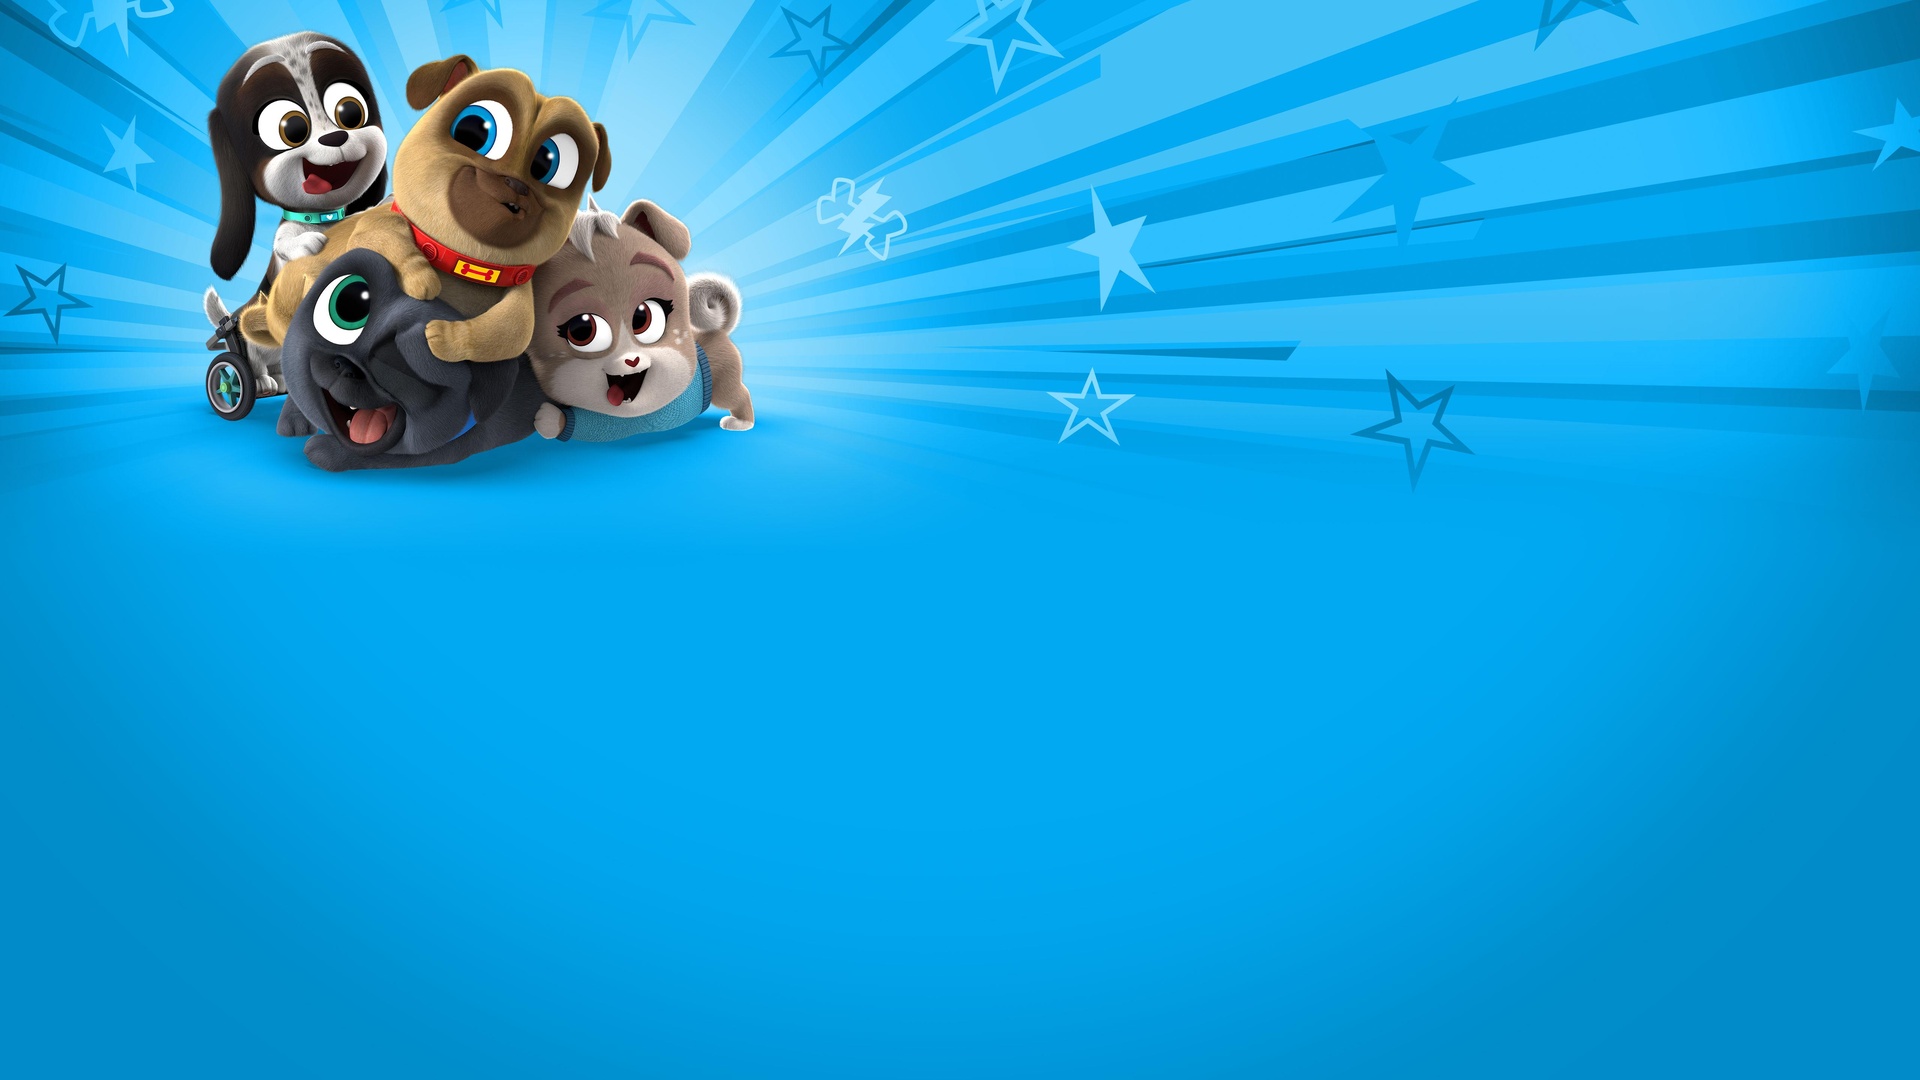 Puppy Dog Pals Wallpapers